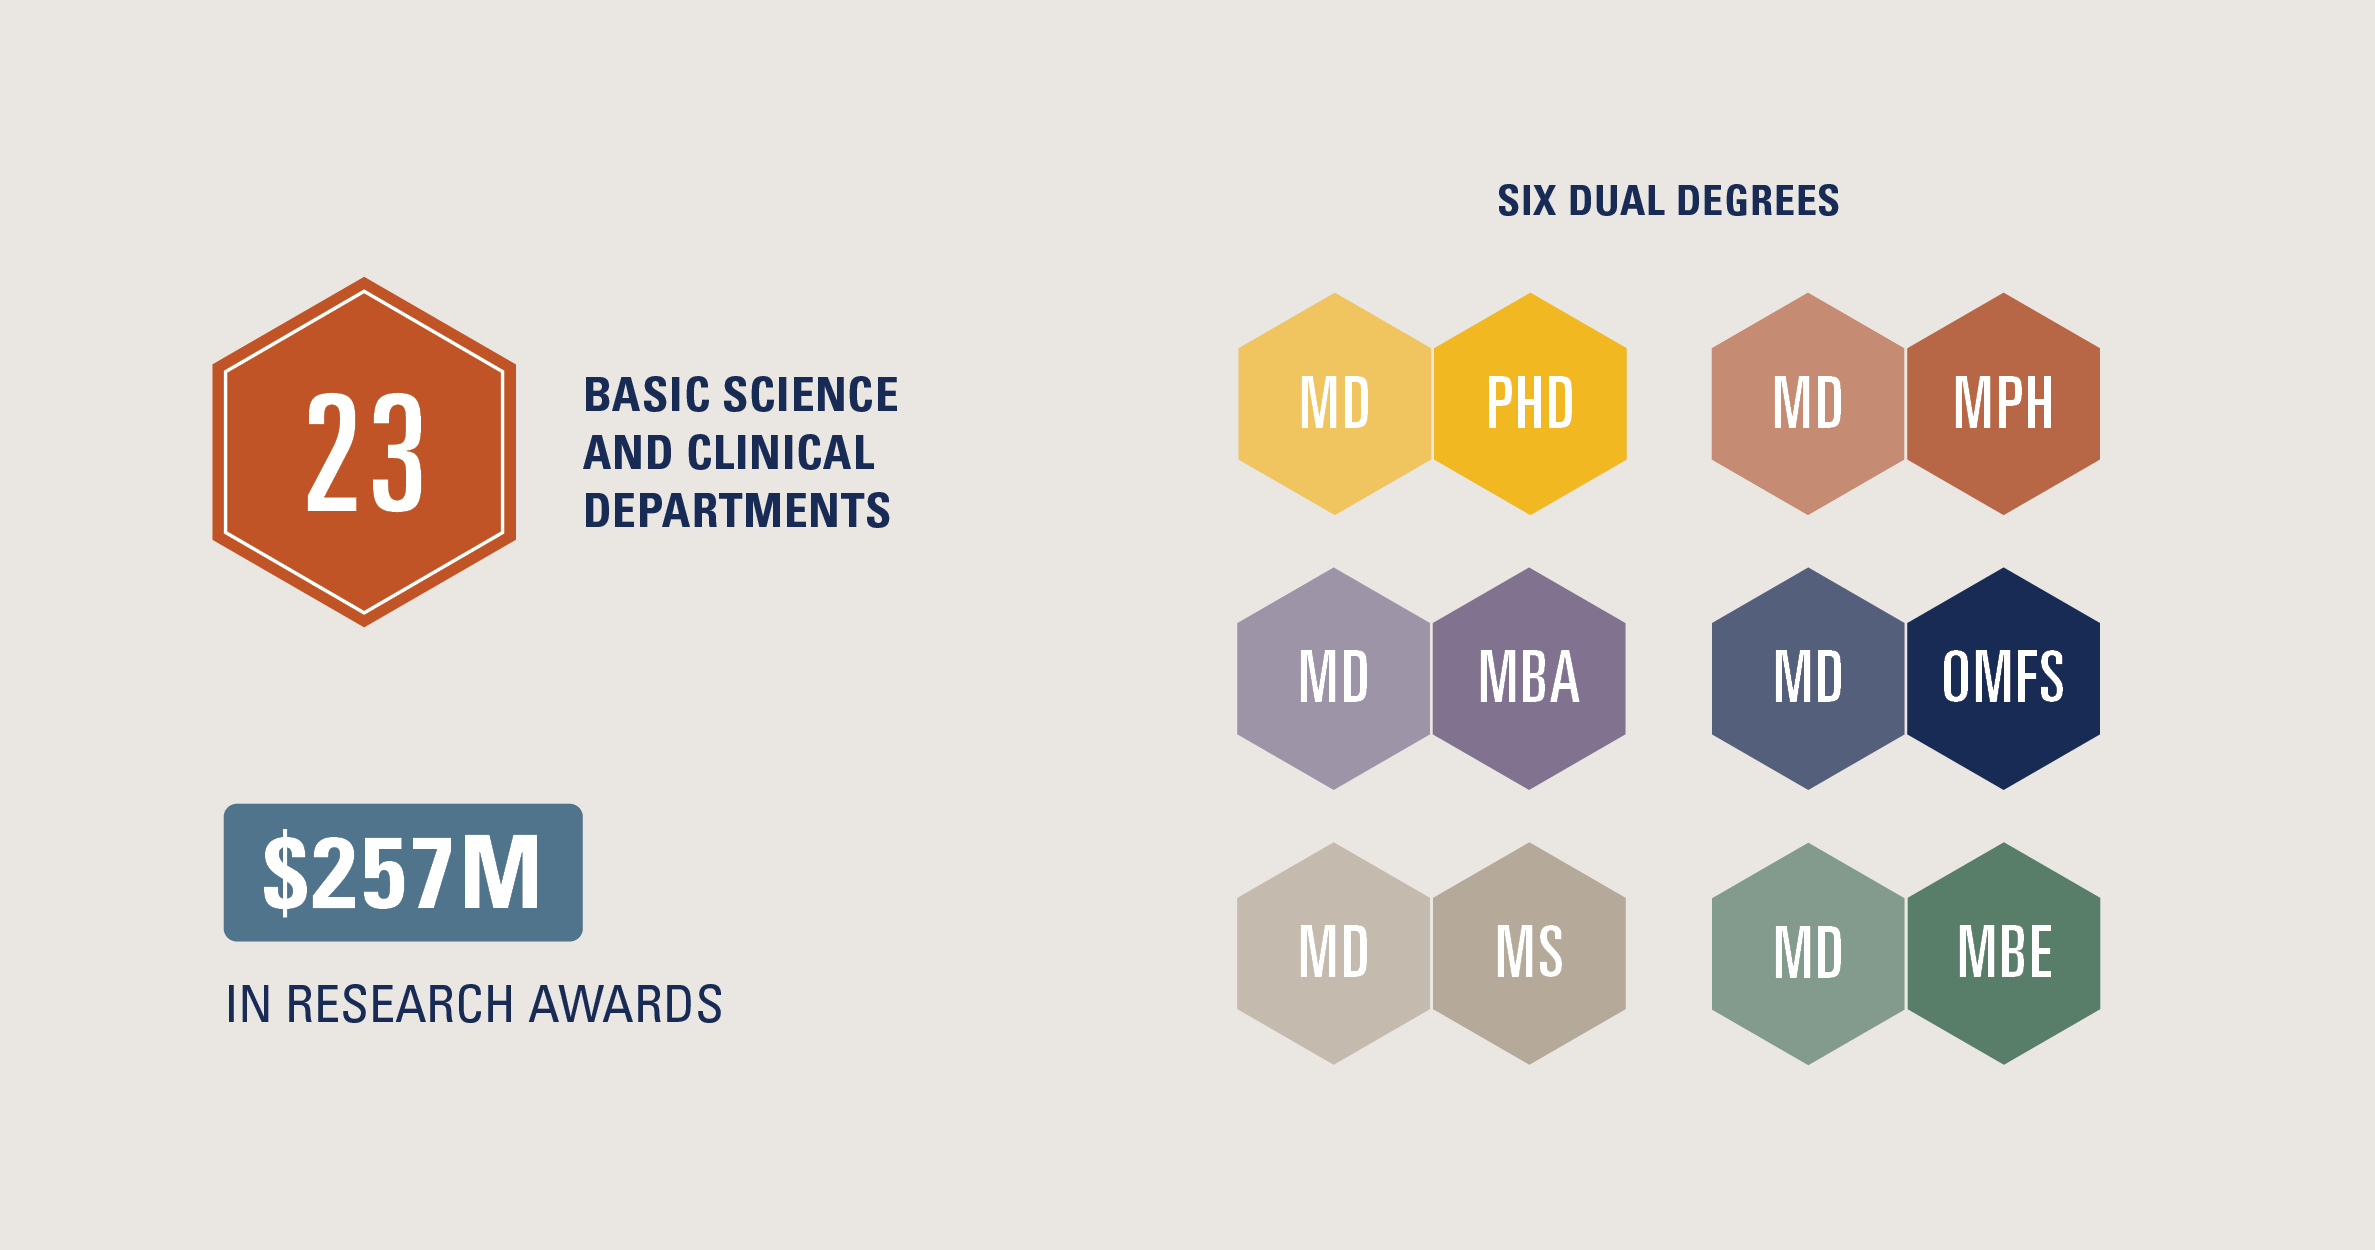 Statistics representing six dual degrees including MD PHD, MD MPH, MD MBA, MD OMFS, MD MS and MD MBE